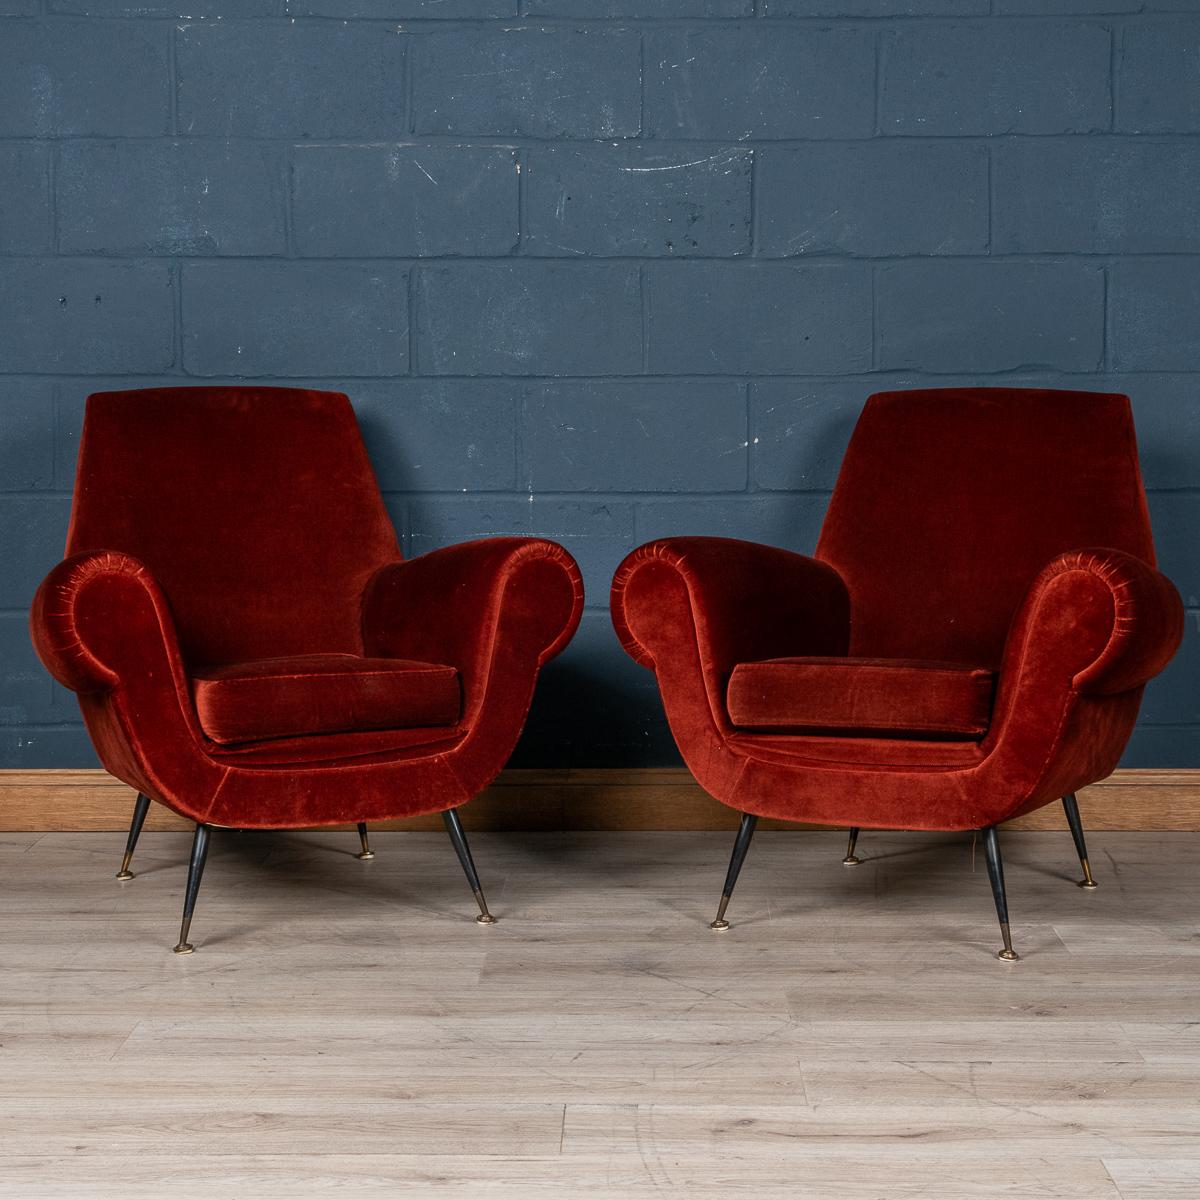 A lovely pair of armchairs made in Italy in the middle part of the 20th century. These armchairs have been upholstered in a sumptuous crimson velvet, the striking mid century design with sharp angles, tapered legs finished with brass tips fits so